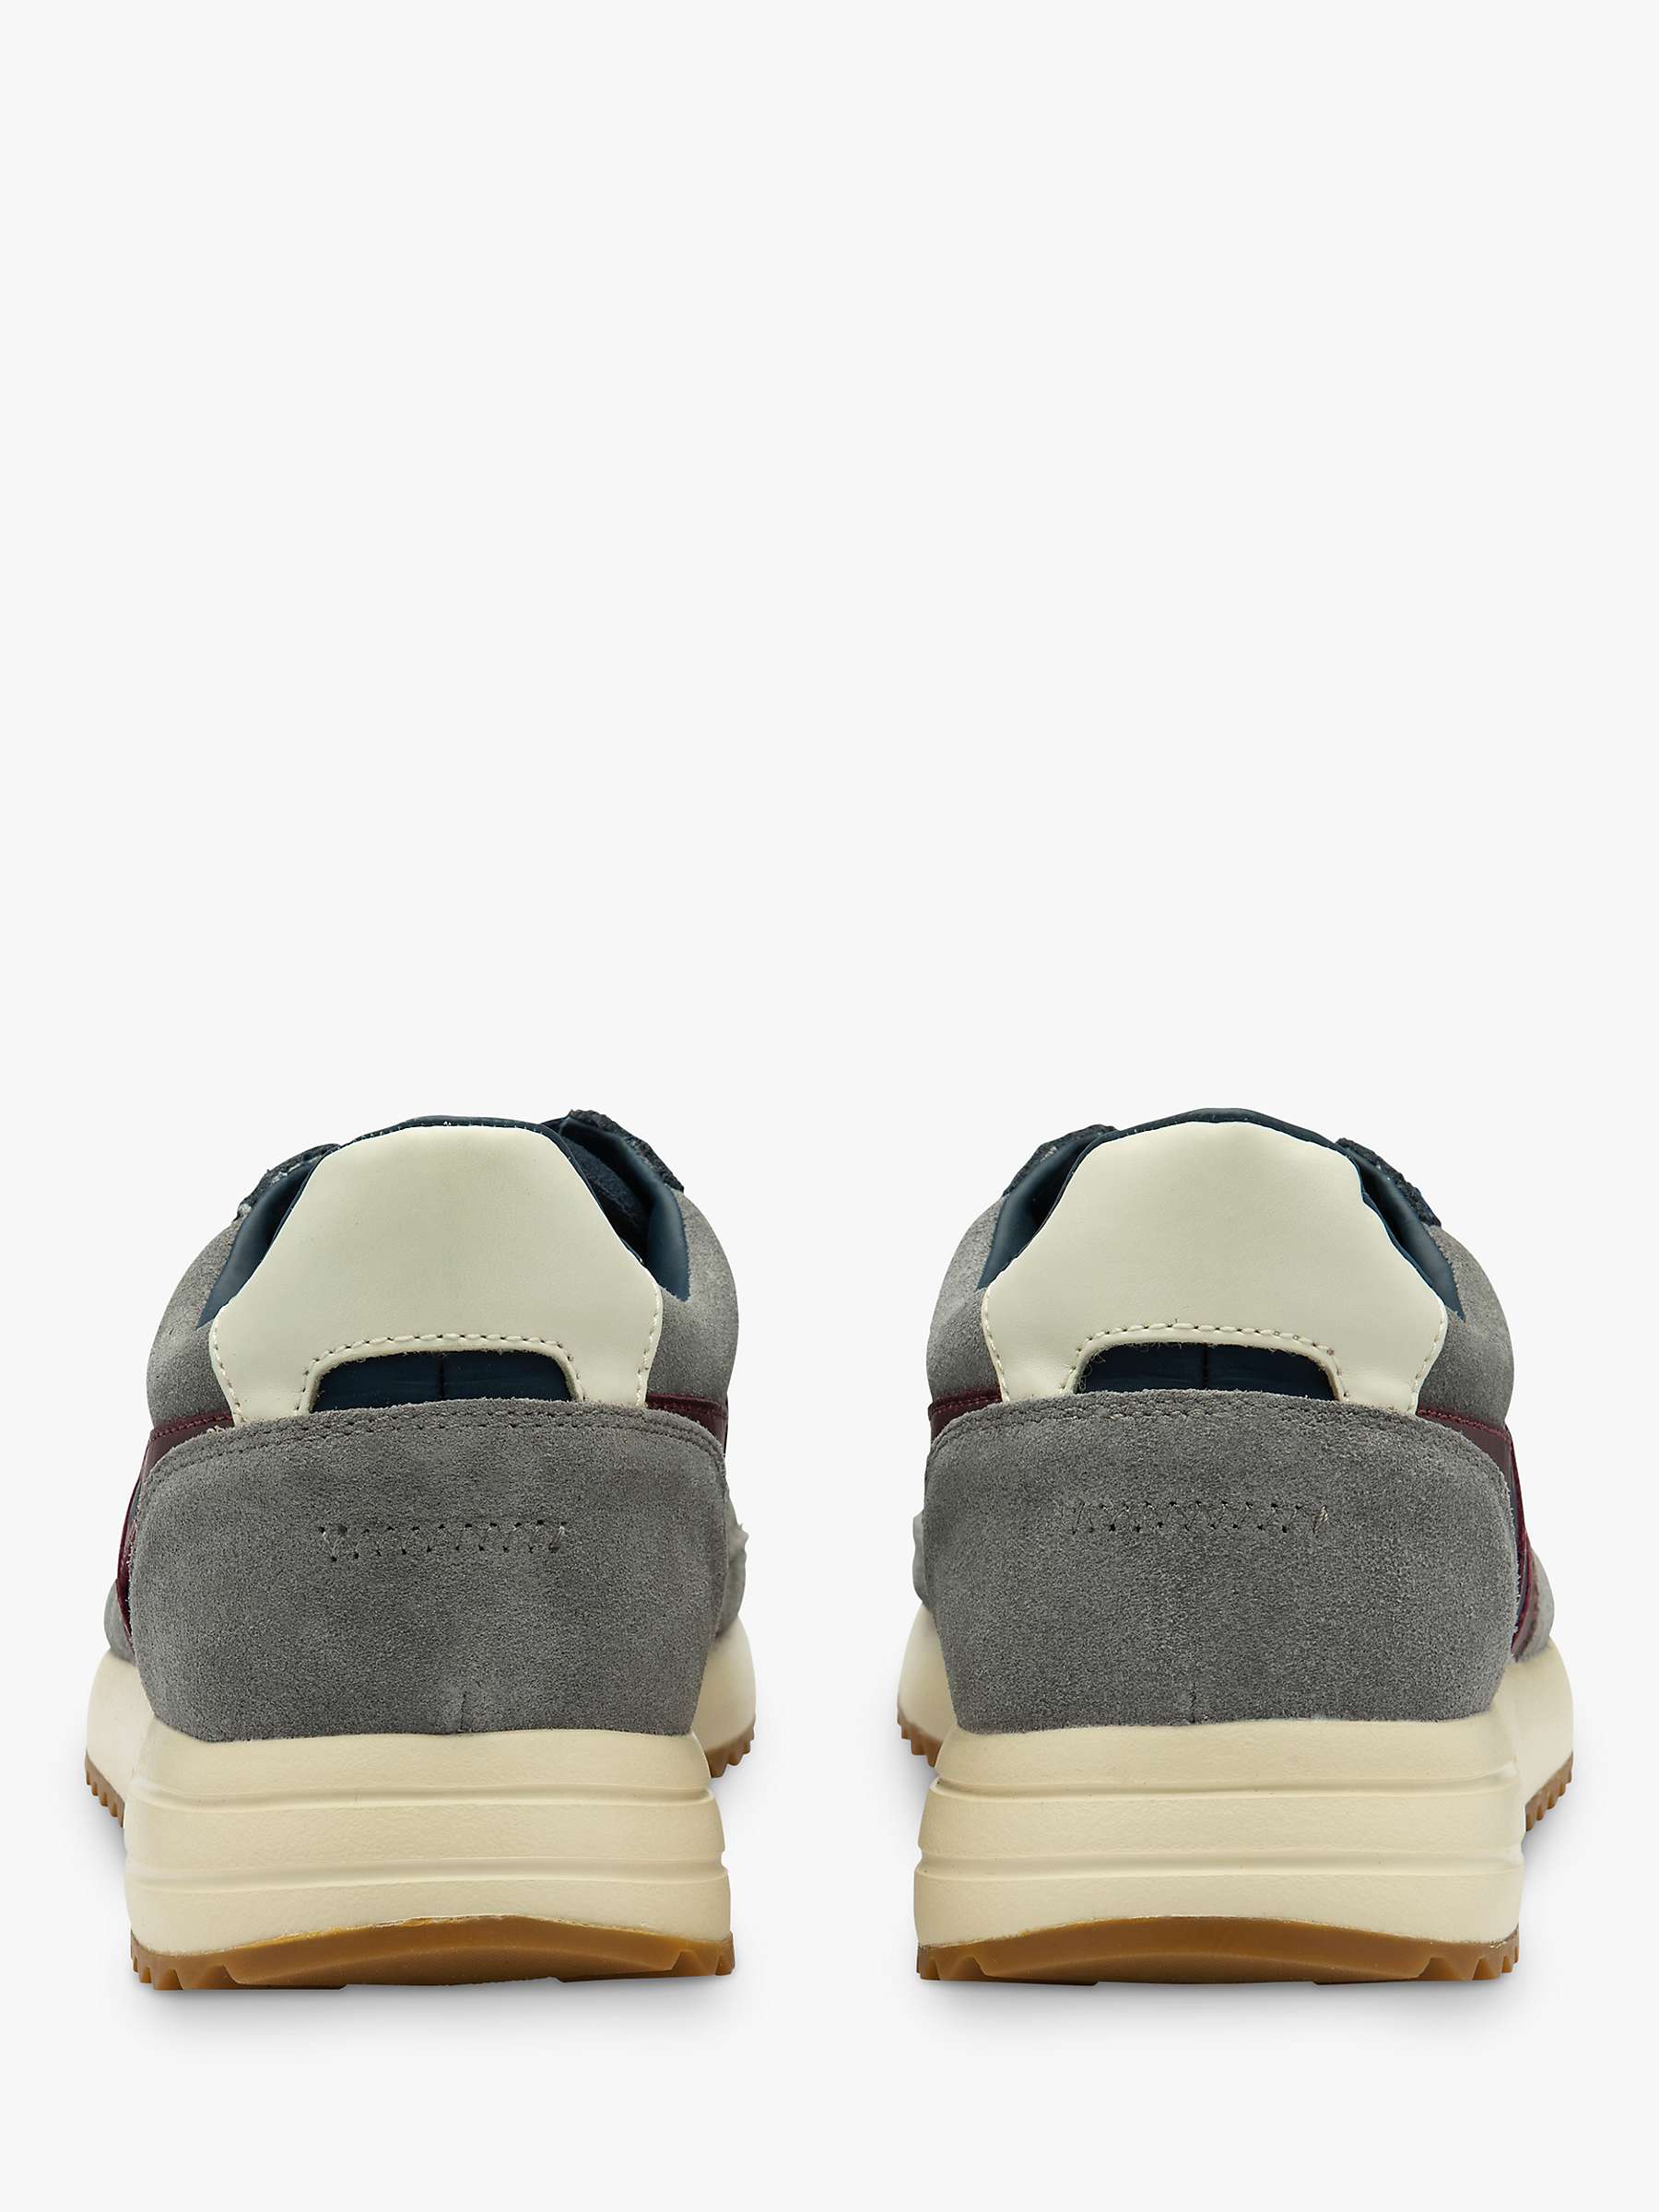 Buy Gola Classics Chicago Lace Up Trainers, Grey/Navy Online at johnlewis.com